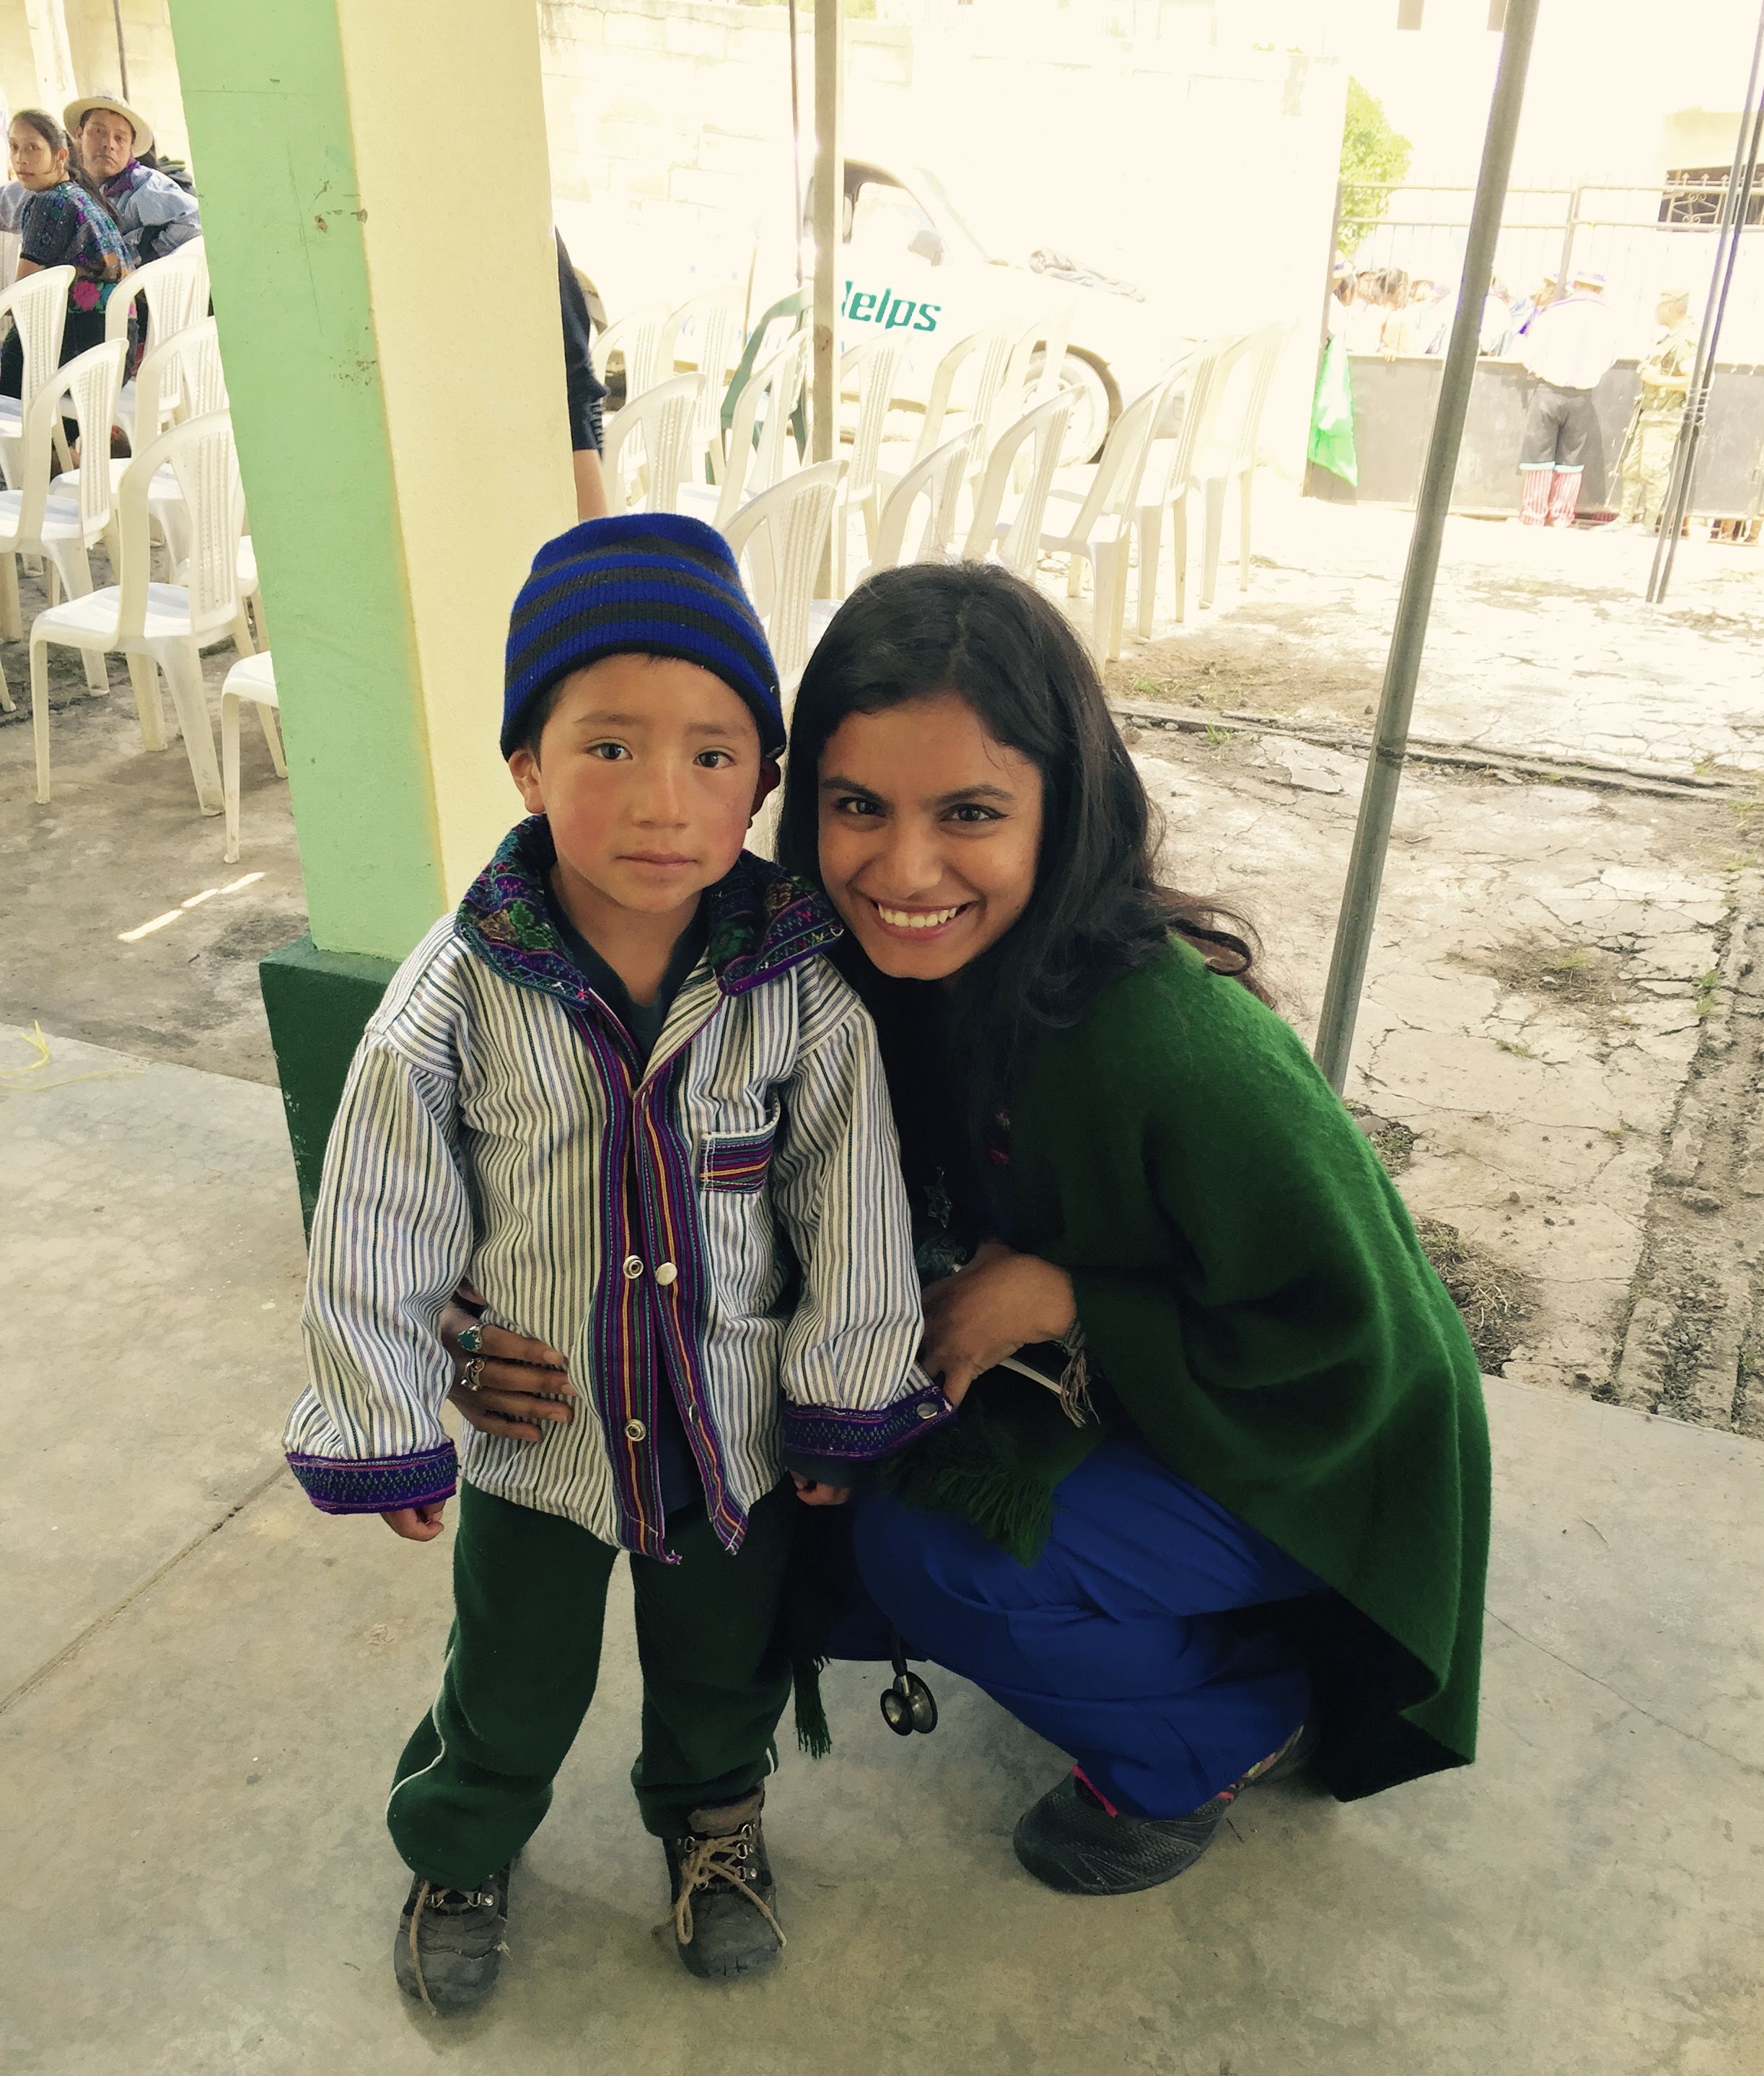 During a medical mission in Guatemala with HELPS International